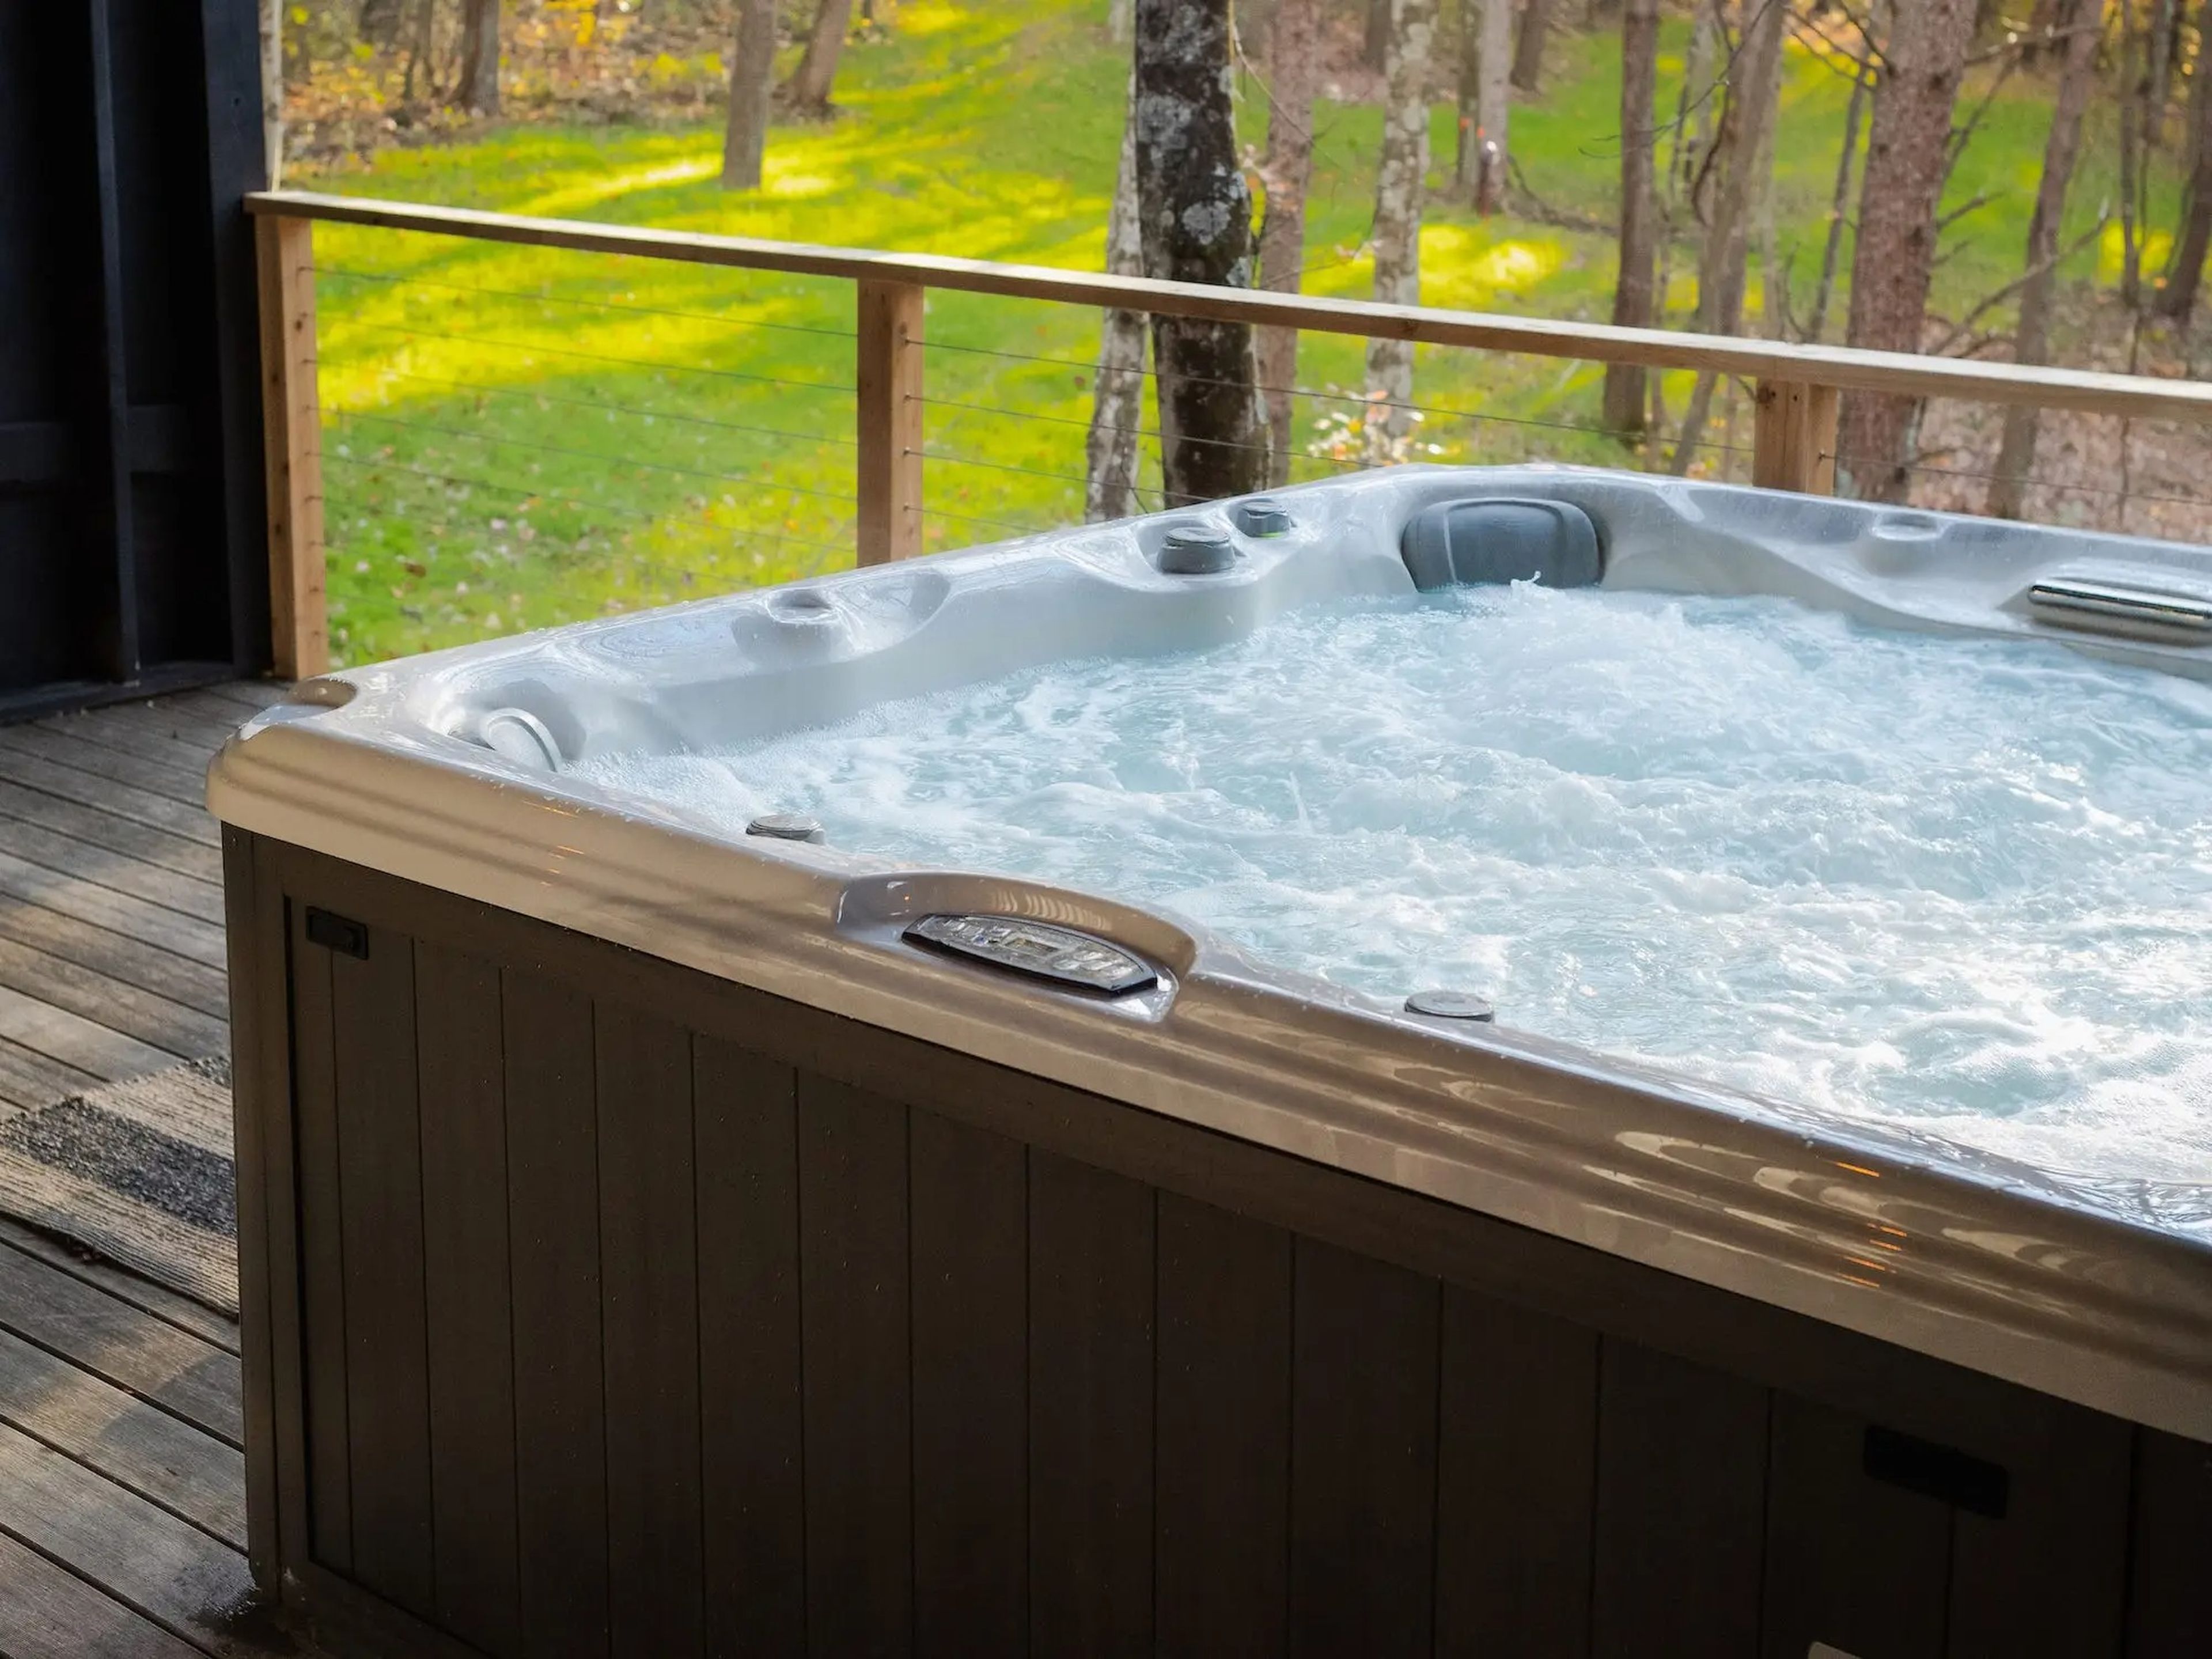 A jacuzzi on a deck overlooking trees inside Hygge, a shipping container home.